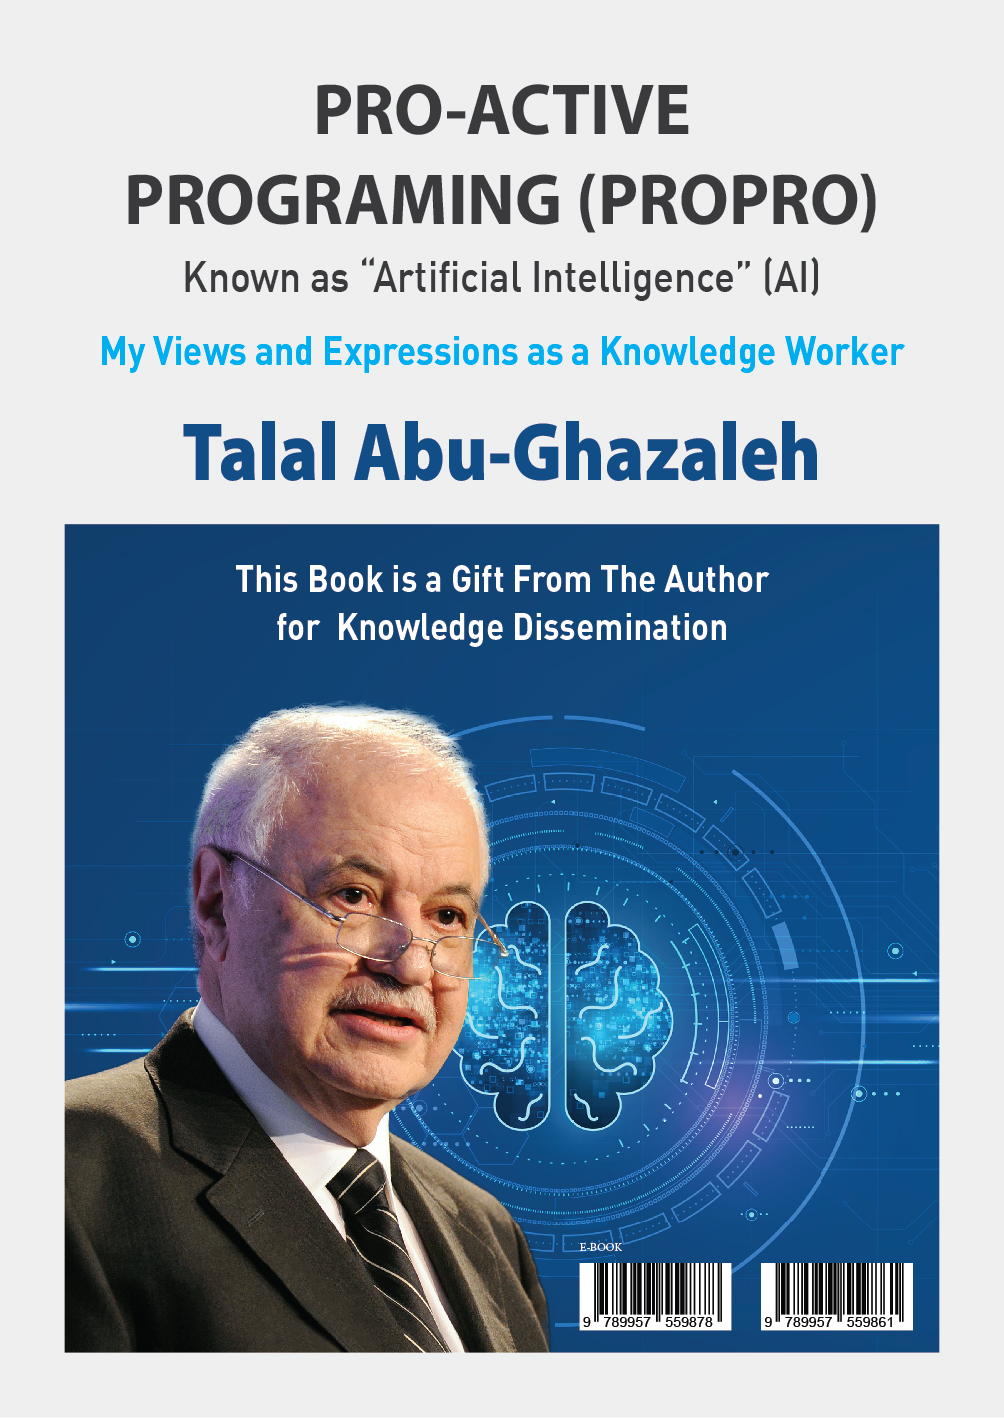 Dr. Abu-Ghazaleh Launches New Book, a first of its kind, on Perceptions and Challenges of the Future of PRO-ACTIVE Programming 